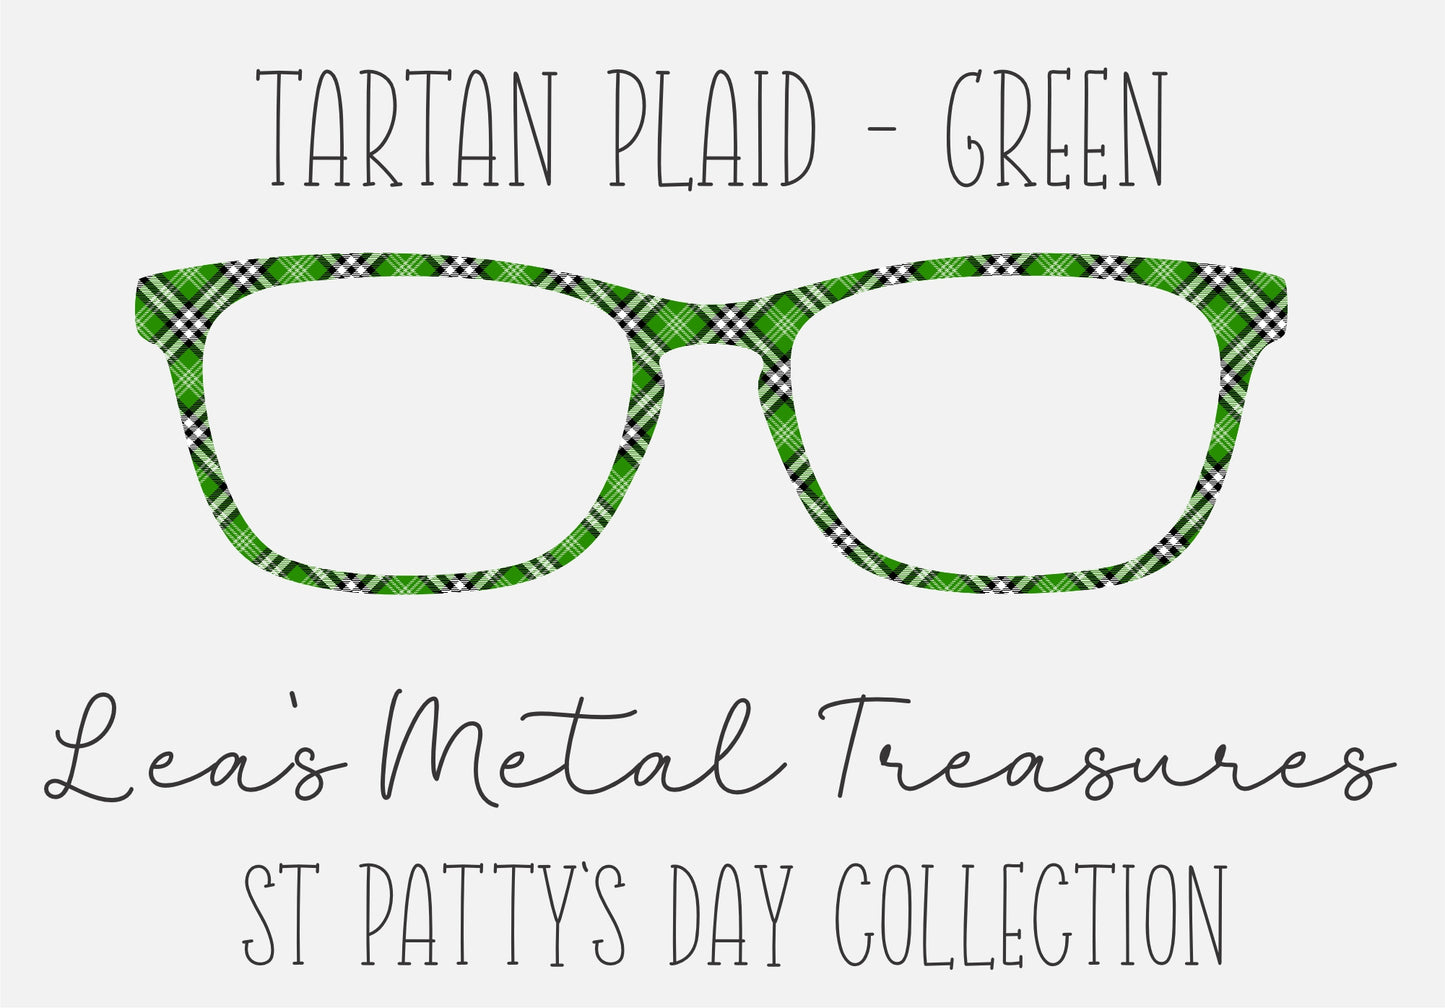 TARTAN PLAID GREEN Eyewear Frame Toppers COMES WITH MAGNETS